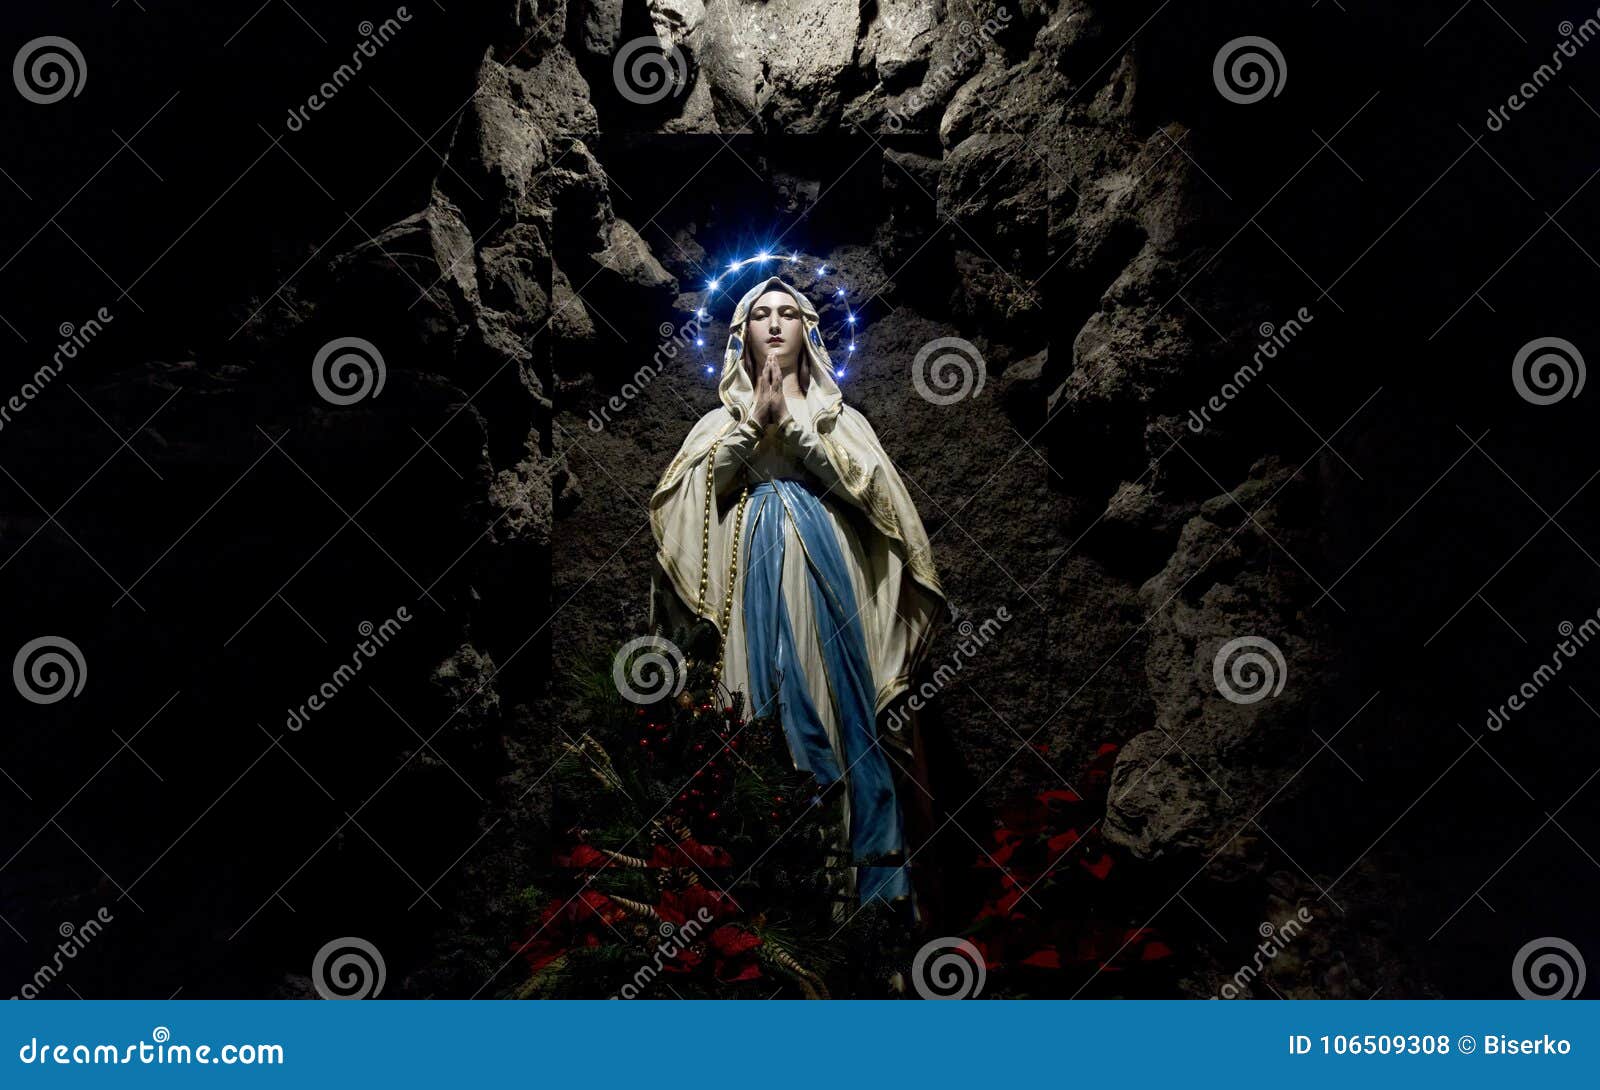 mary, mother of jesus